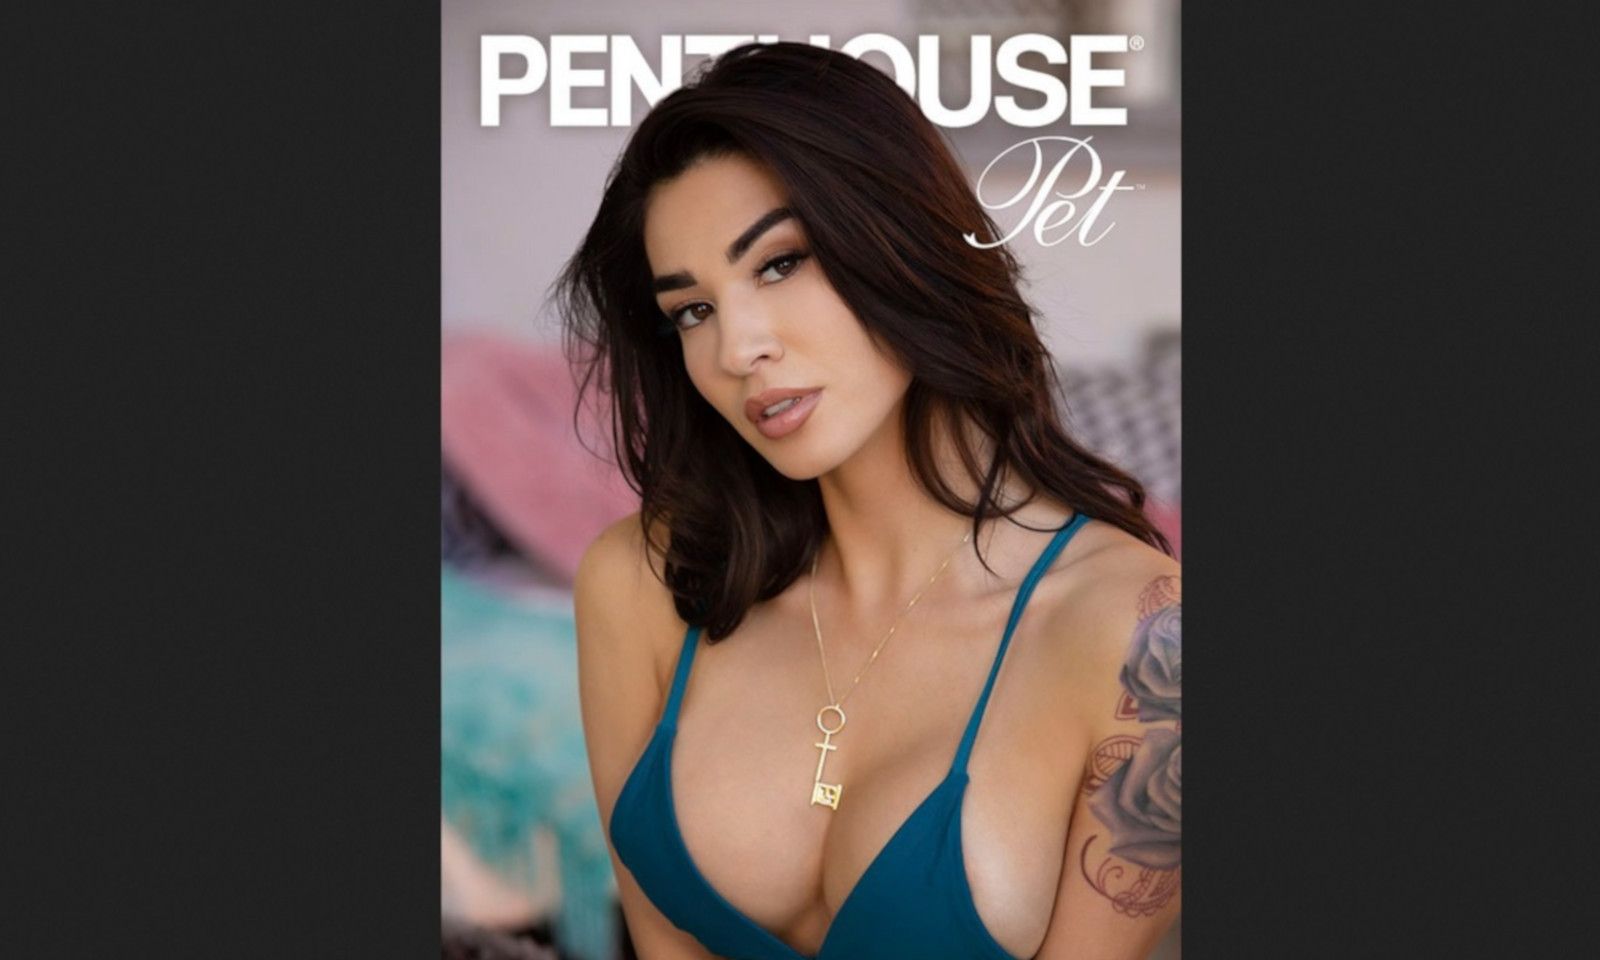 Amber marie penthouse